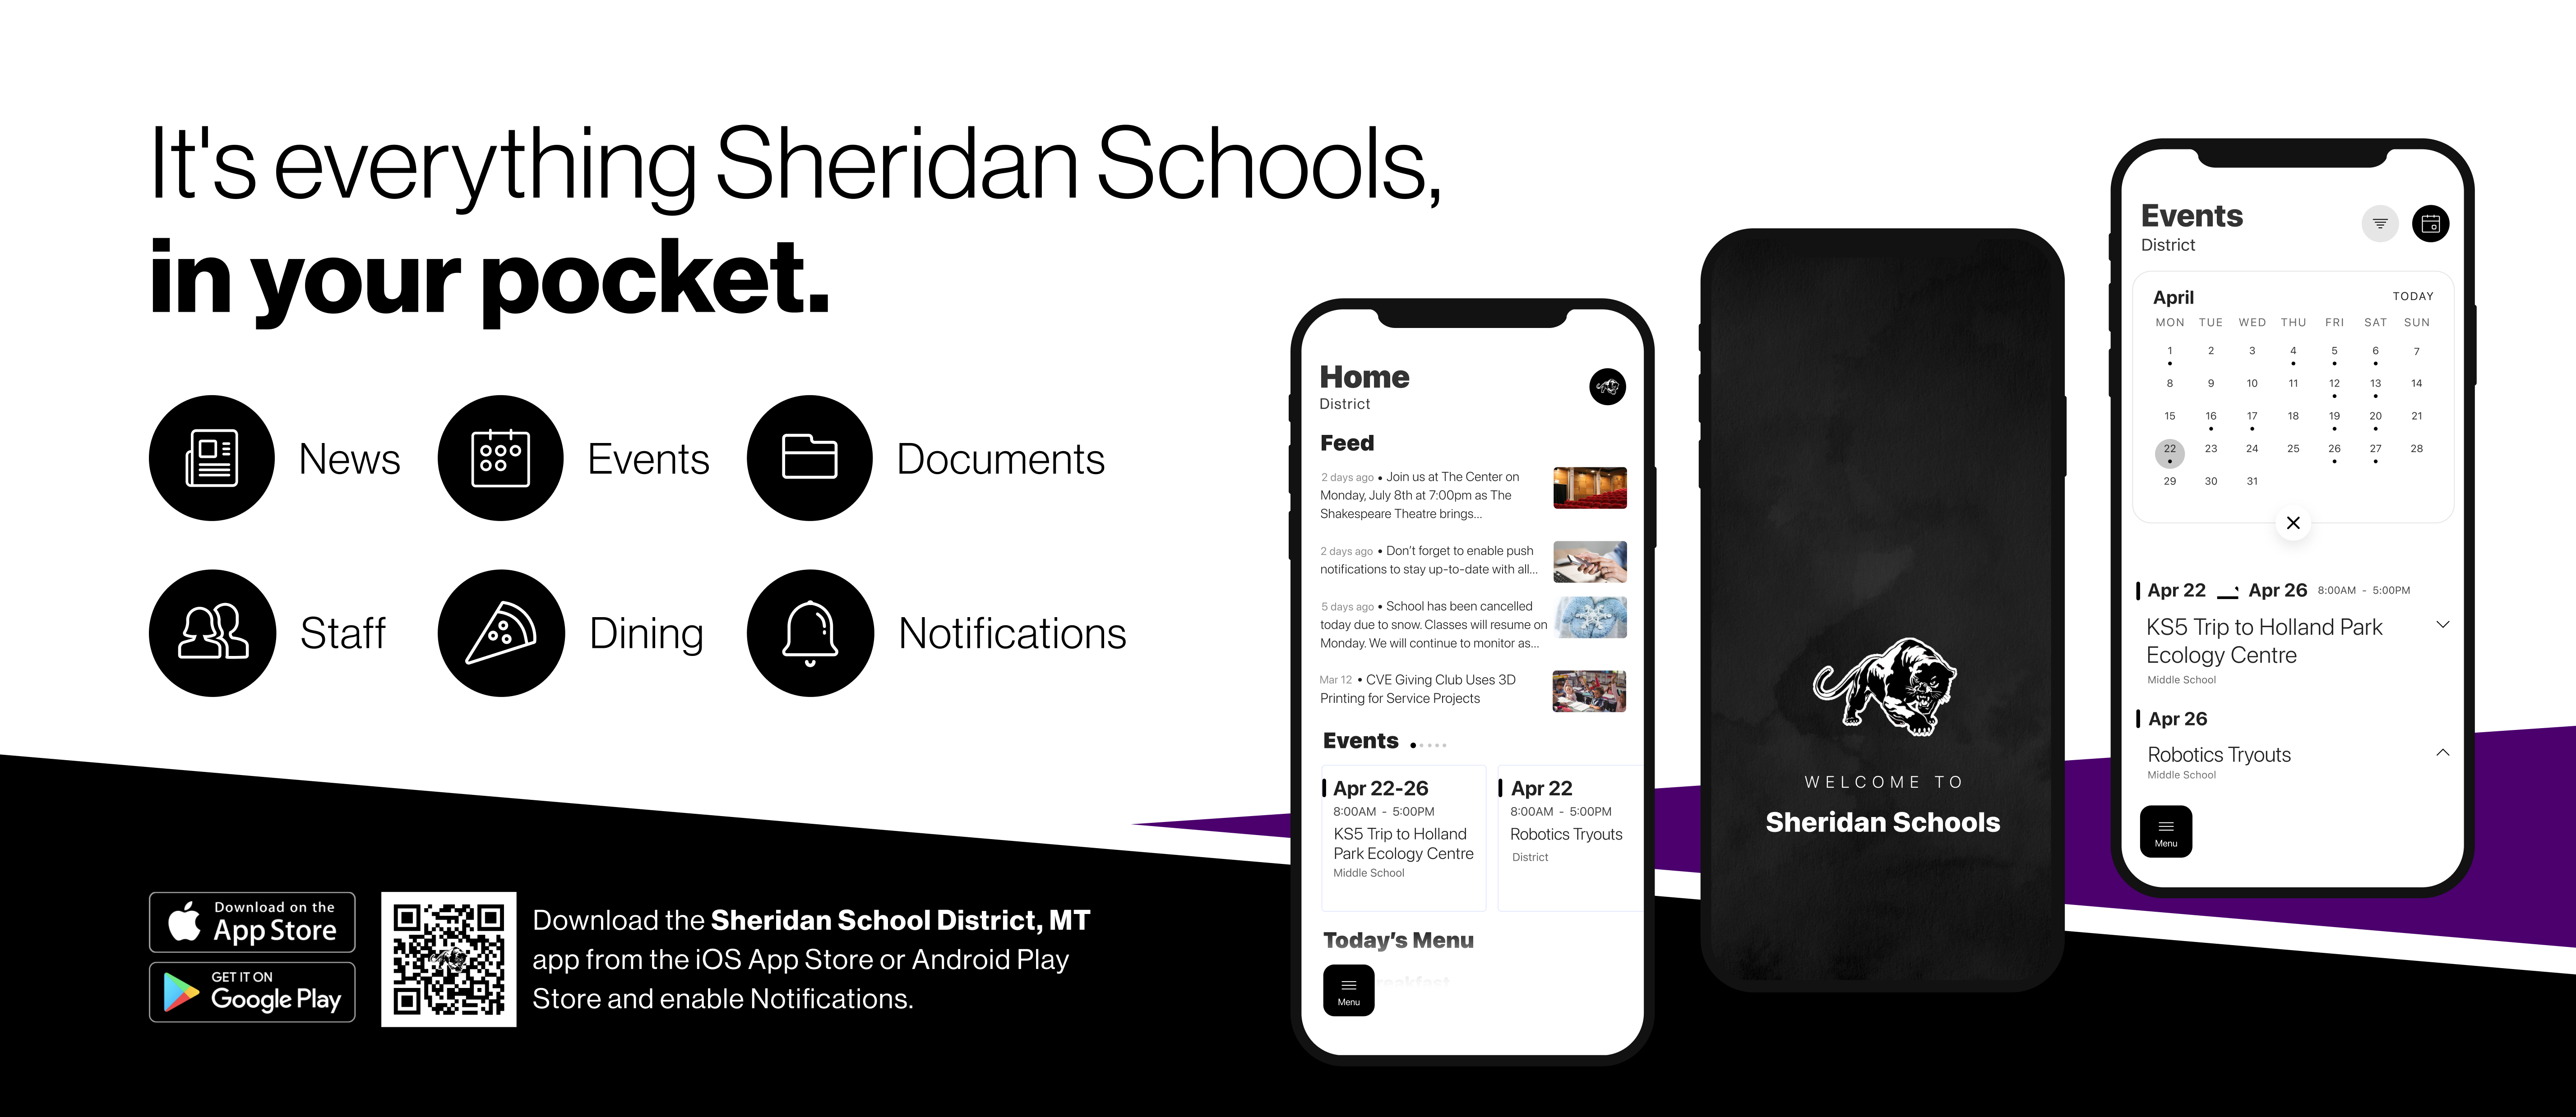 It's everything Sheridan Schools in your pocket! Download our new app by clicking the link at the bottom of the gallery